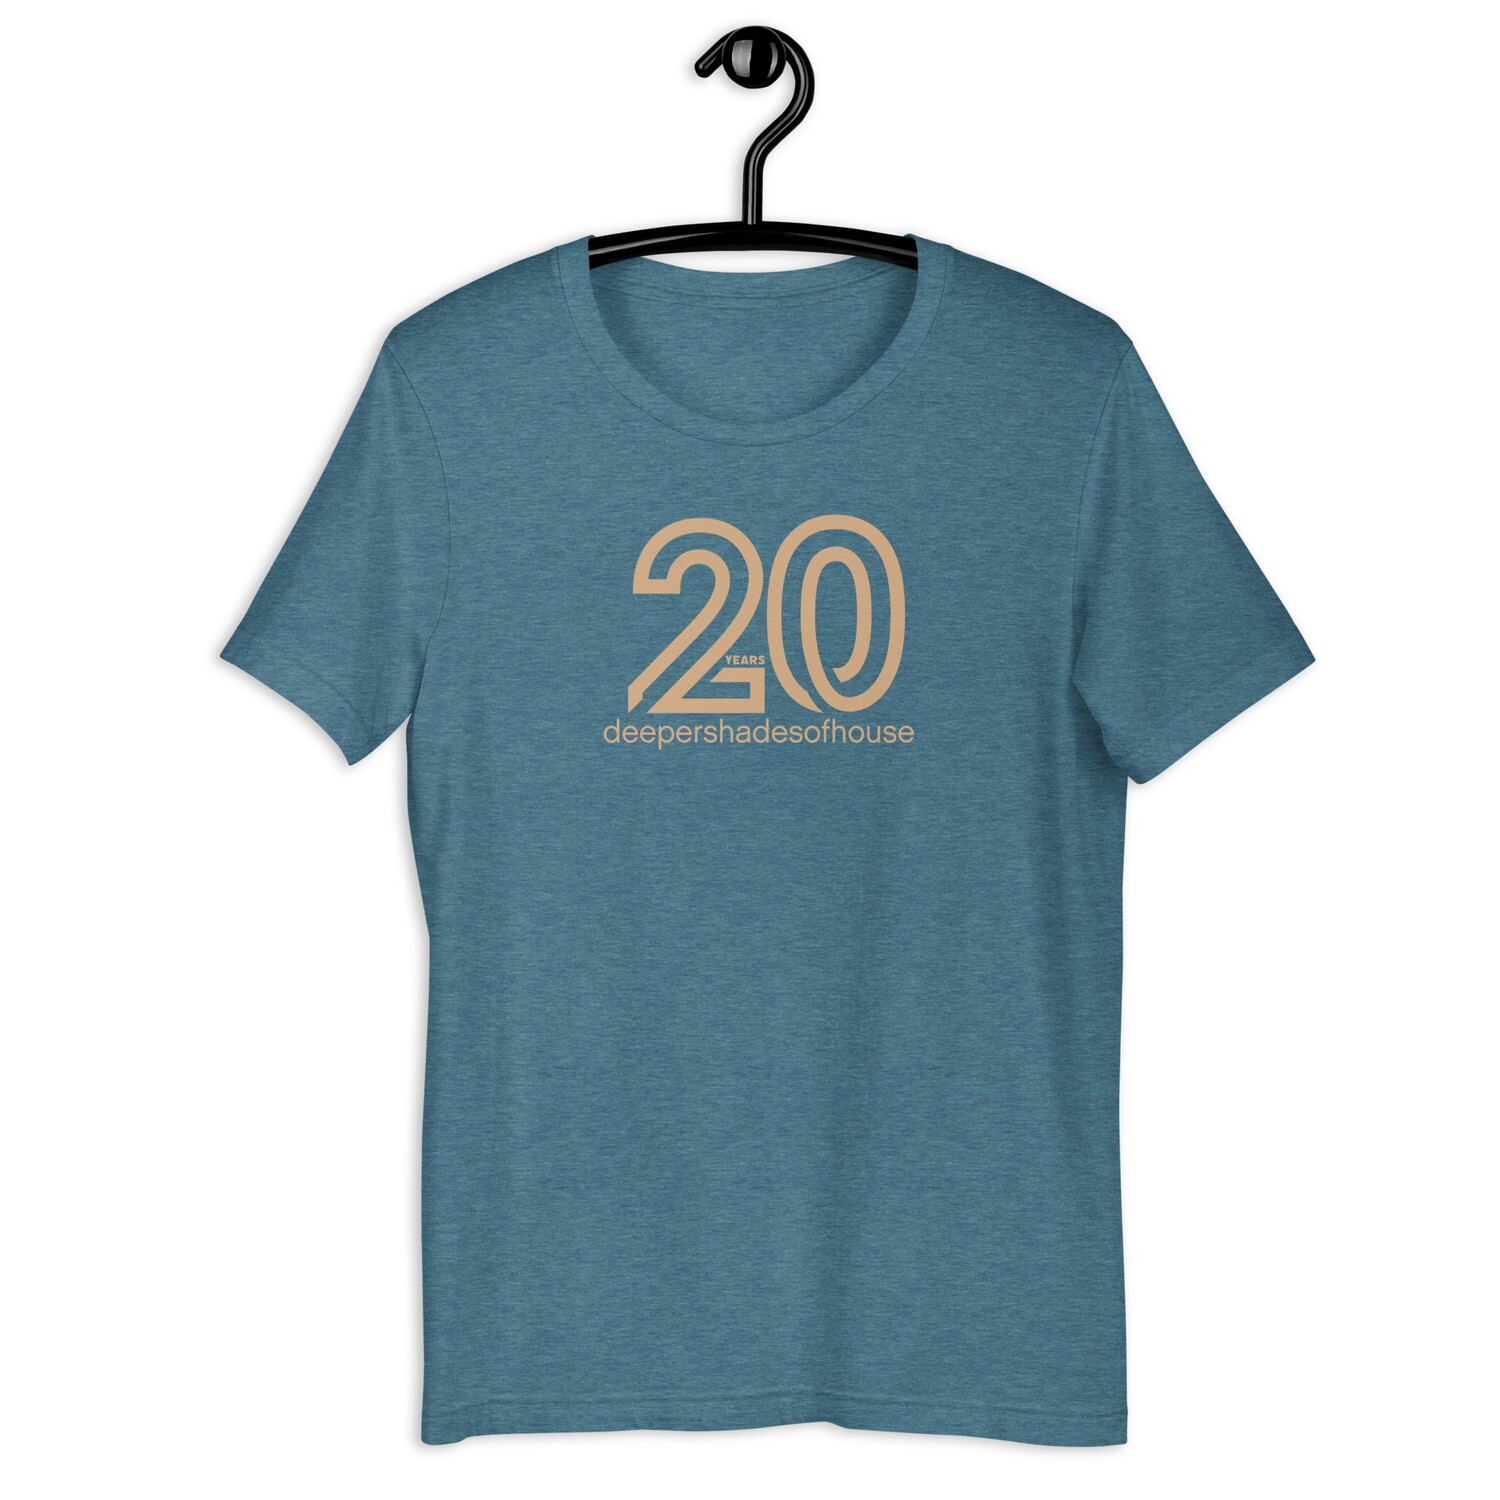 20 YEARS DEEPER SHADES OF HOUSE Unisex T-Shirt